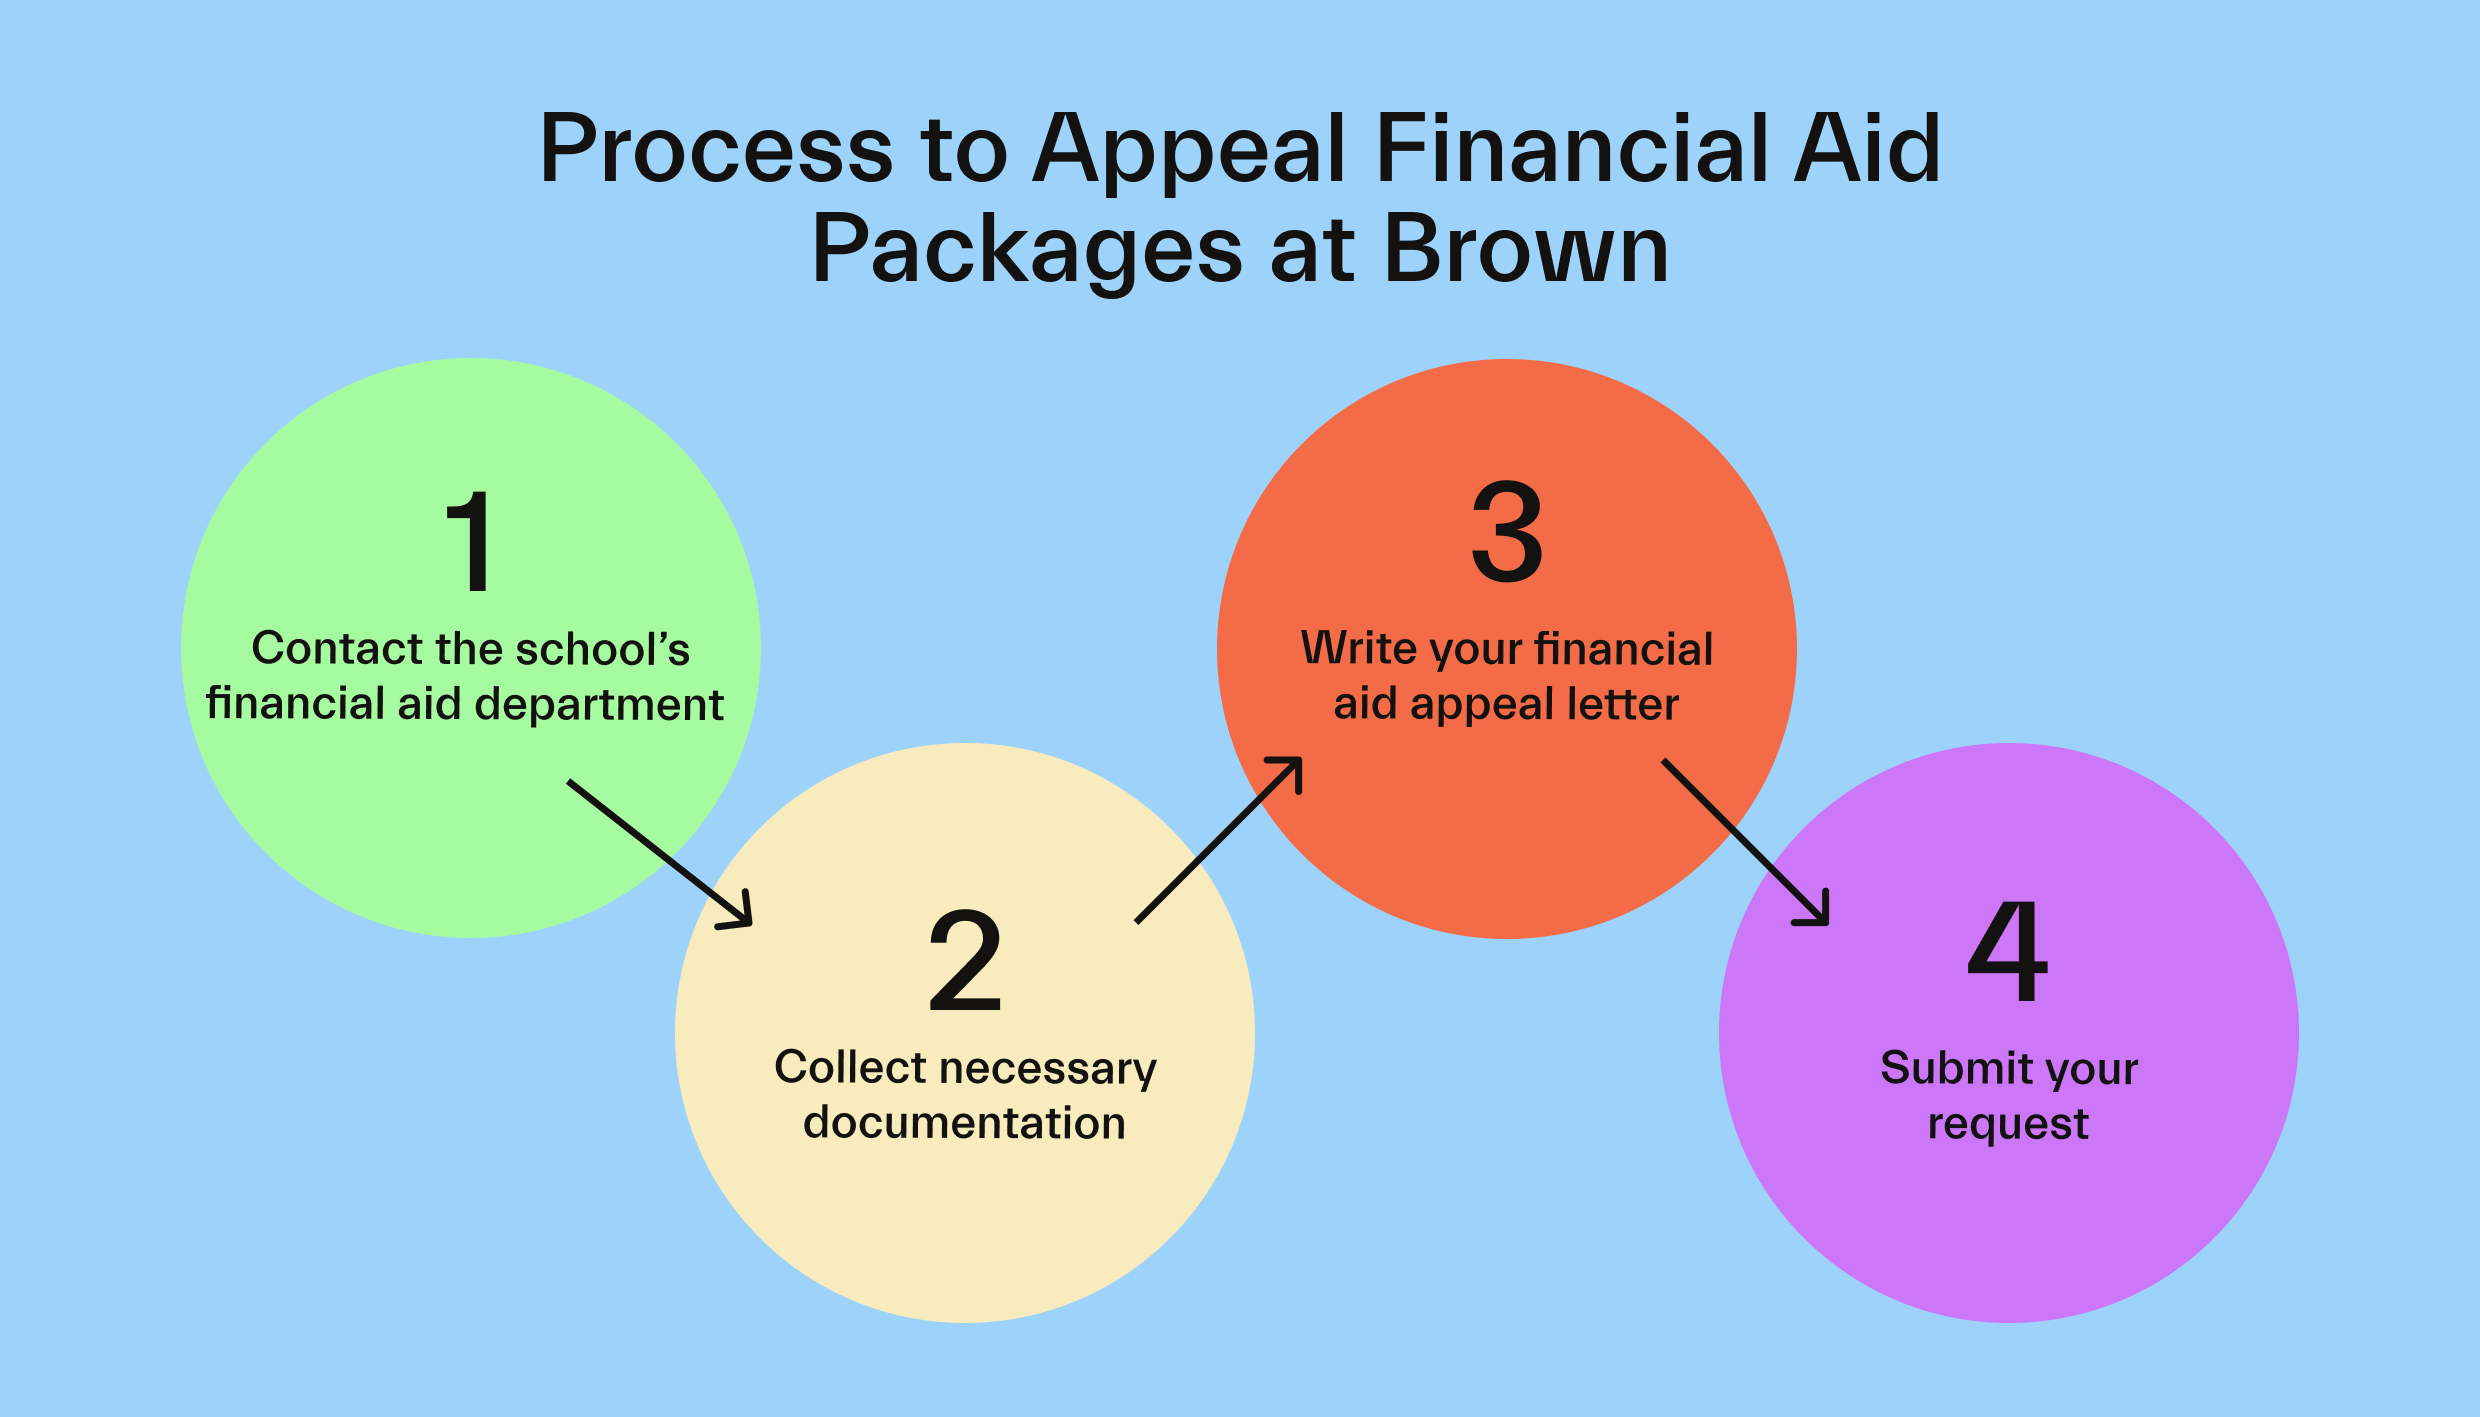 How to Appeal Financial Aid